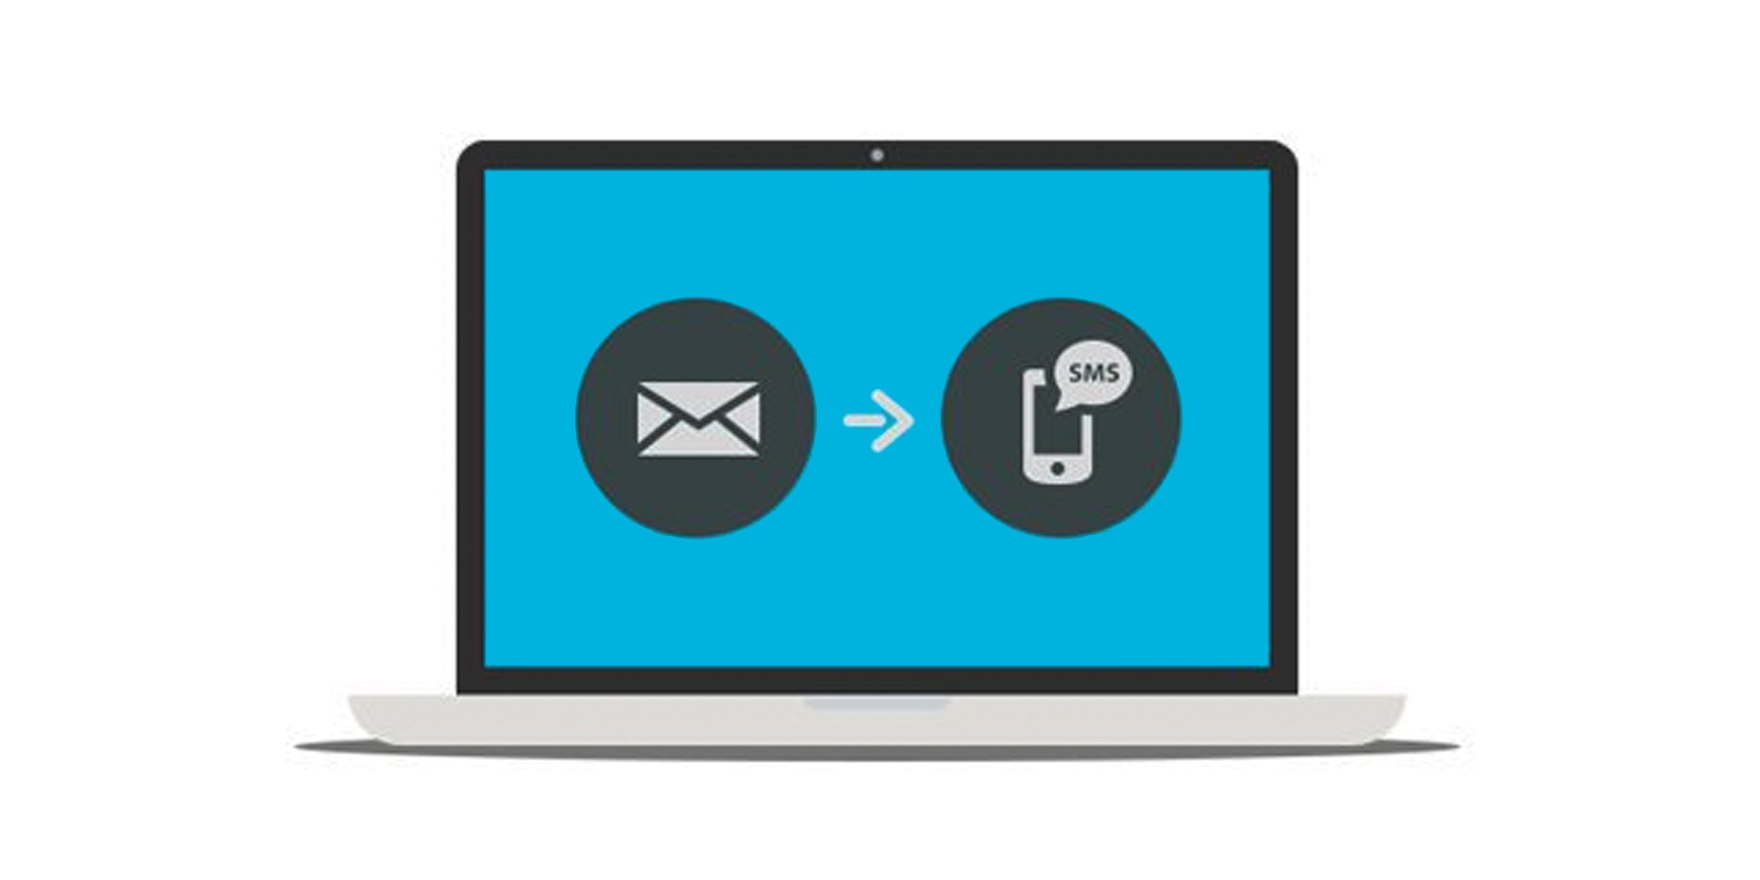 Learn more about Email-To-SMS Gateways